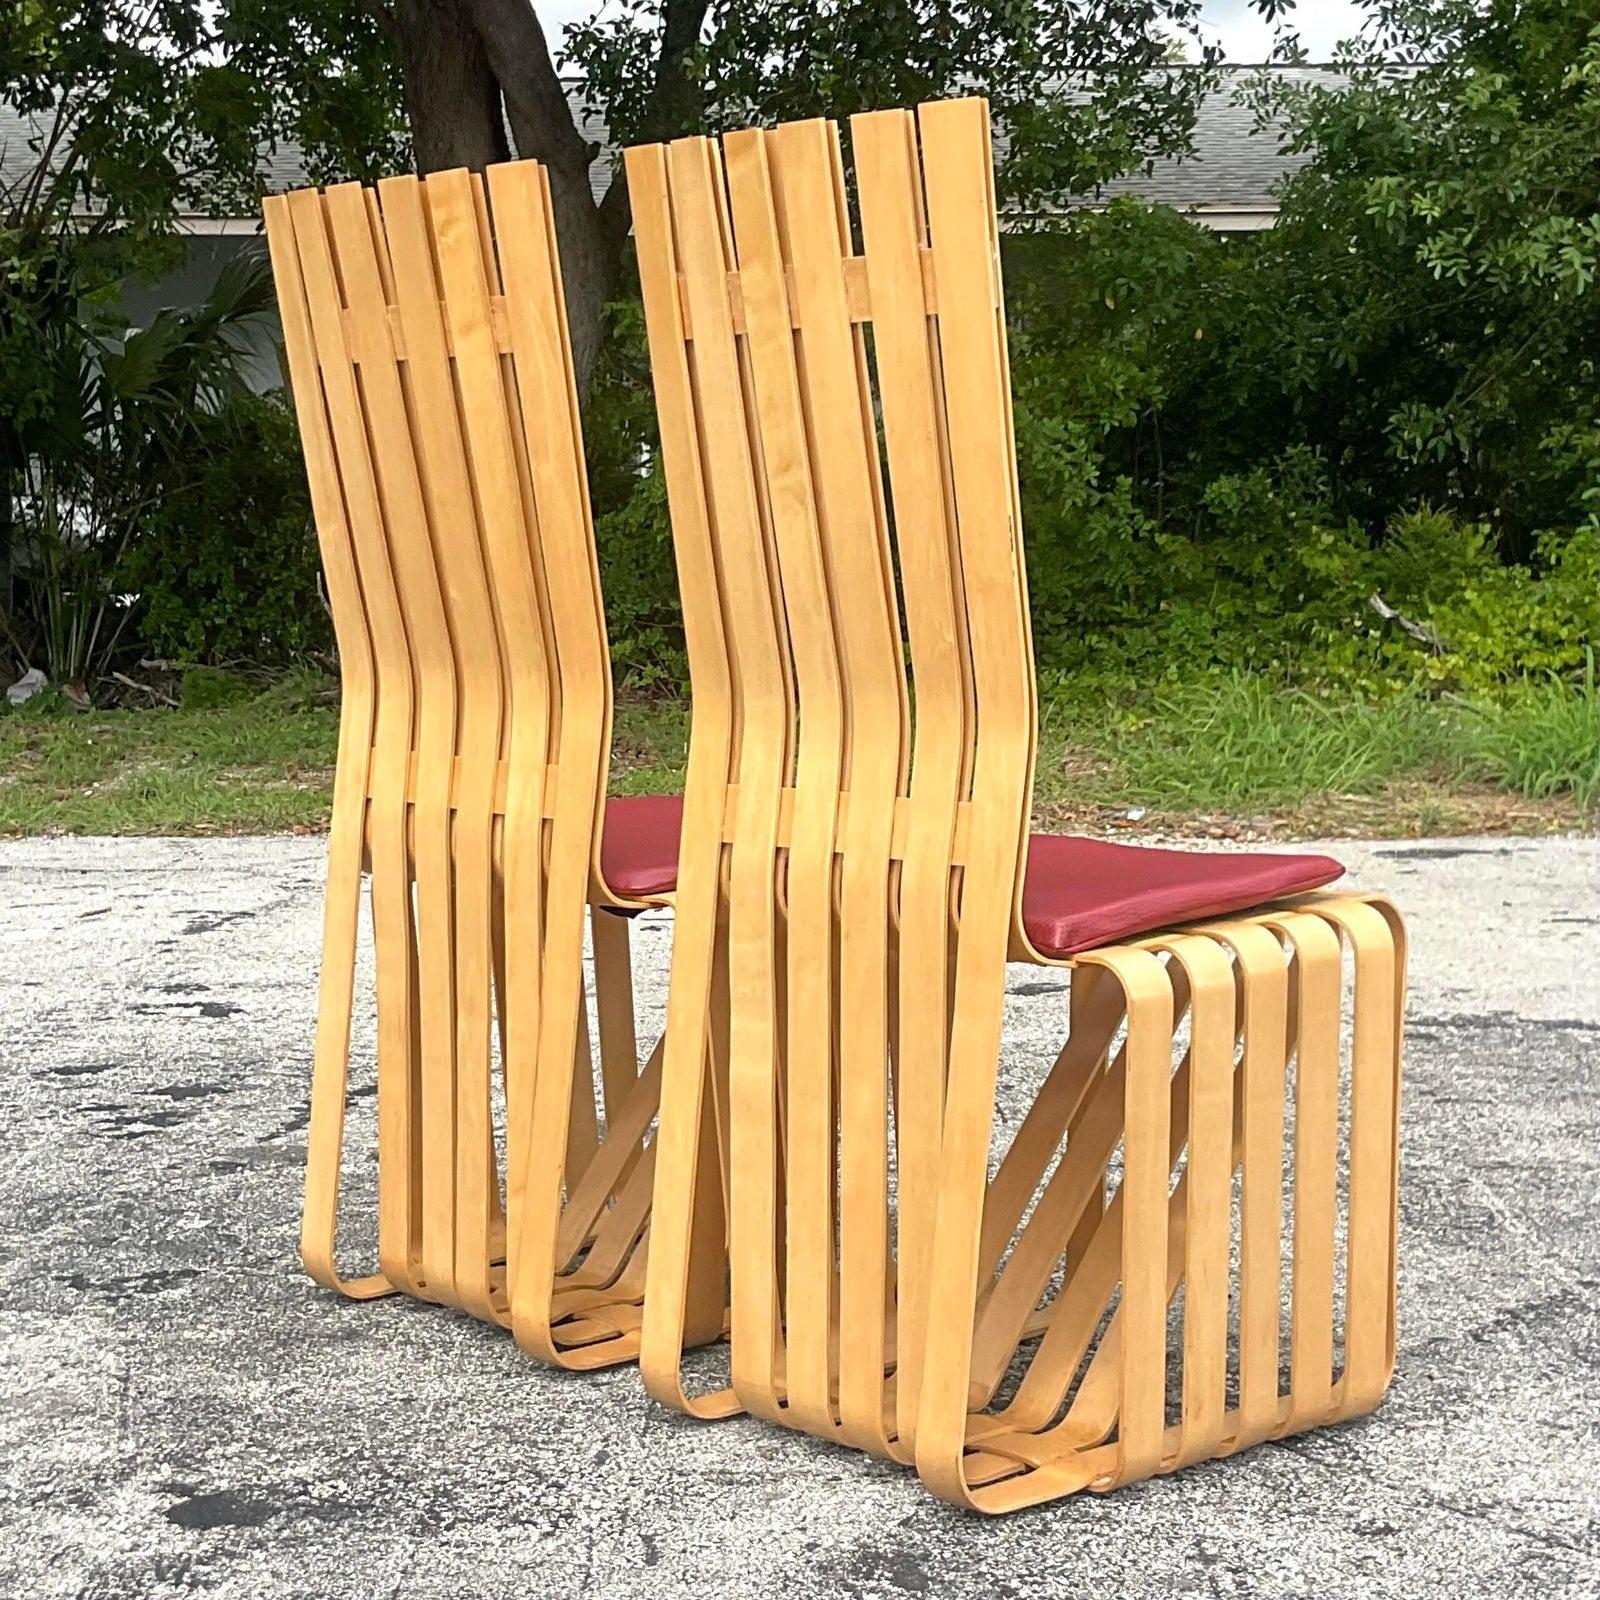 Vintage Contemporary Signed Frank Gehry for Knoll “High Sticking” Chair - a Pair For Sale 5